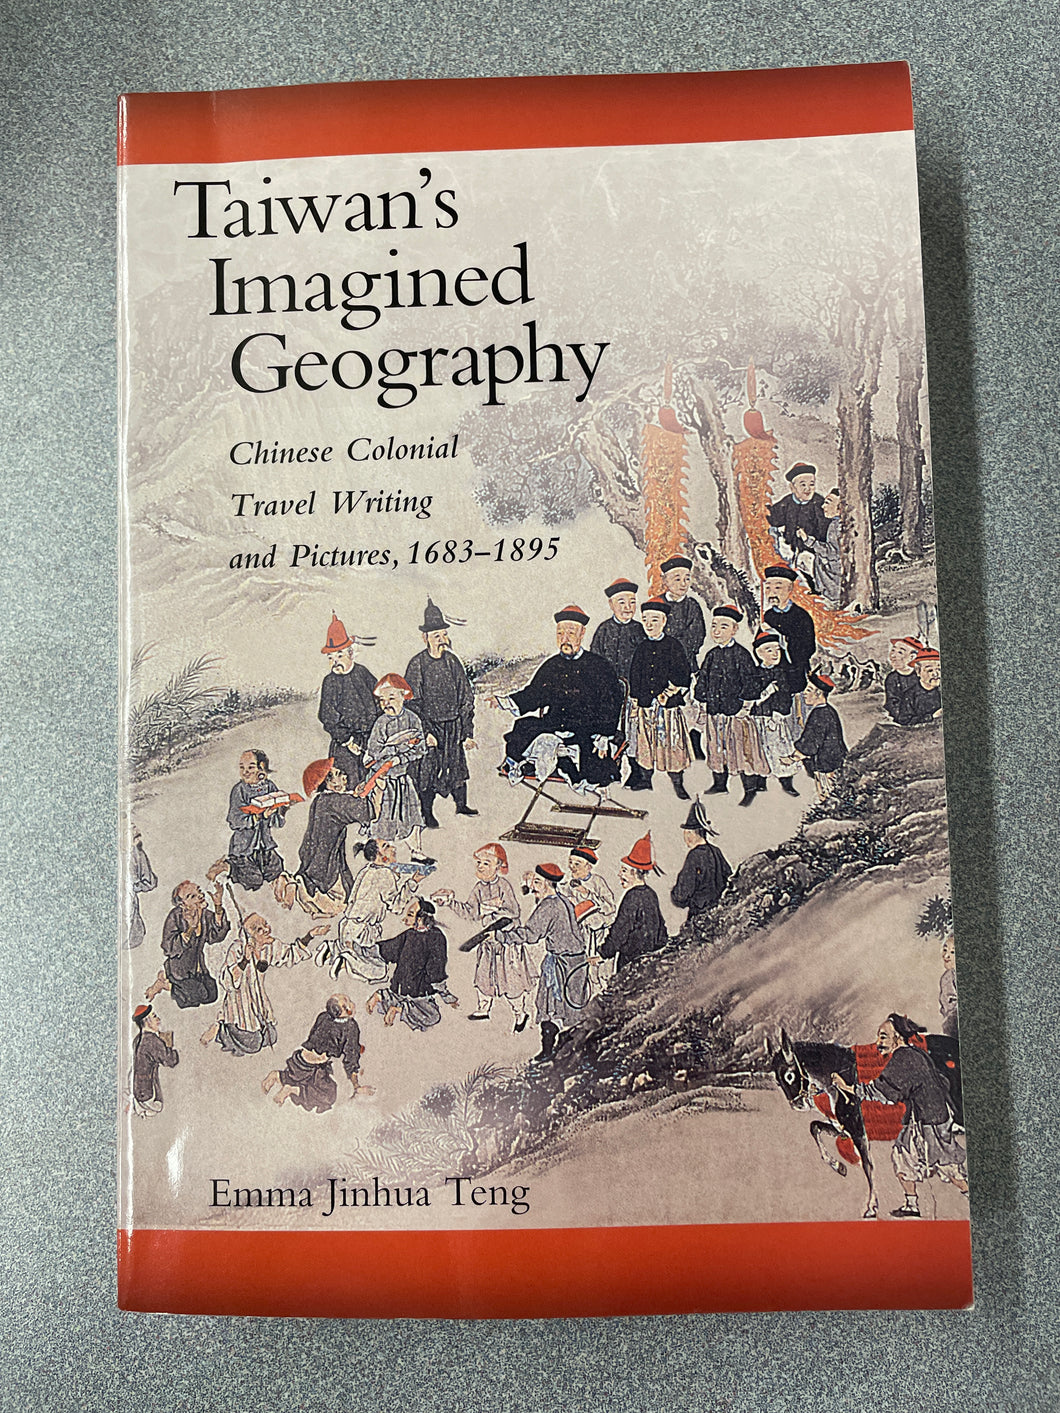 H  Taiwan's Imagined Geography: Chinese Colonial Travel Writing and Pictures, 1683-1895, Teng, Emma Jinhua [2004] N 5/24